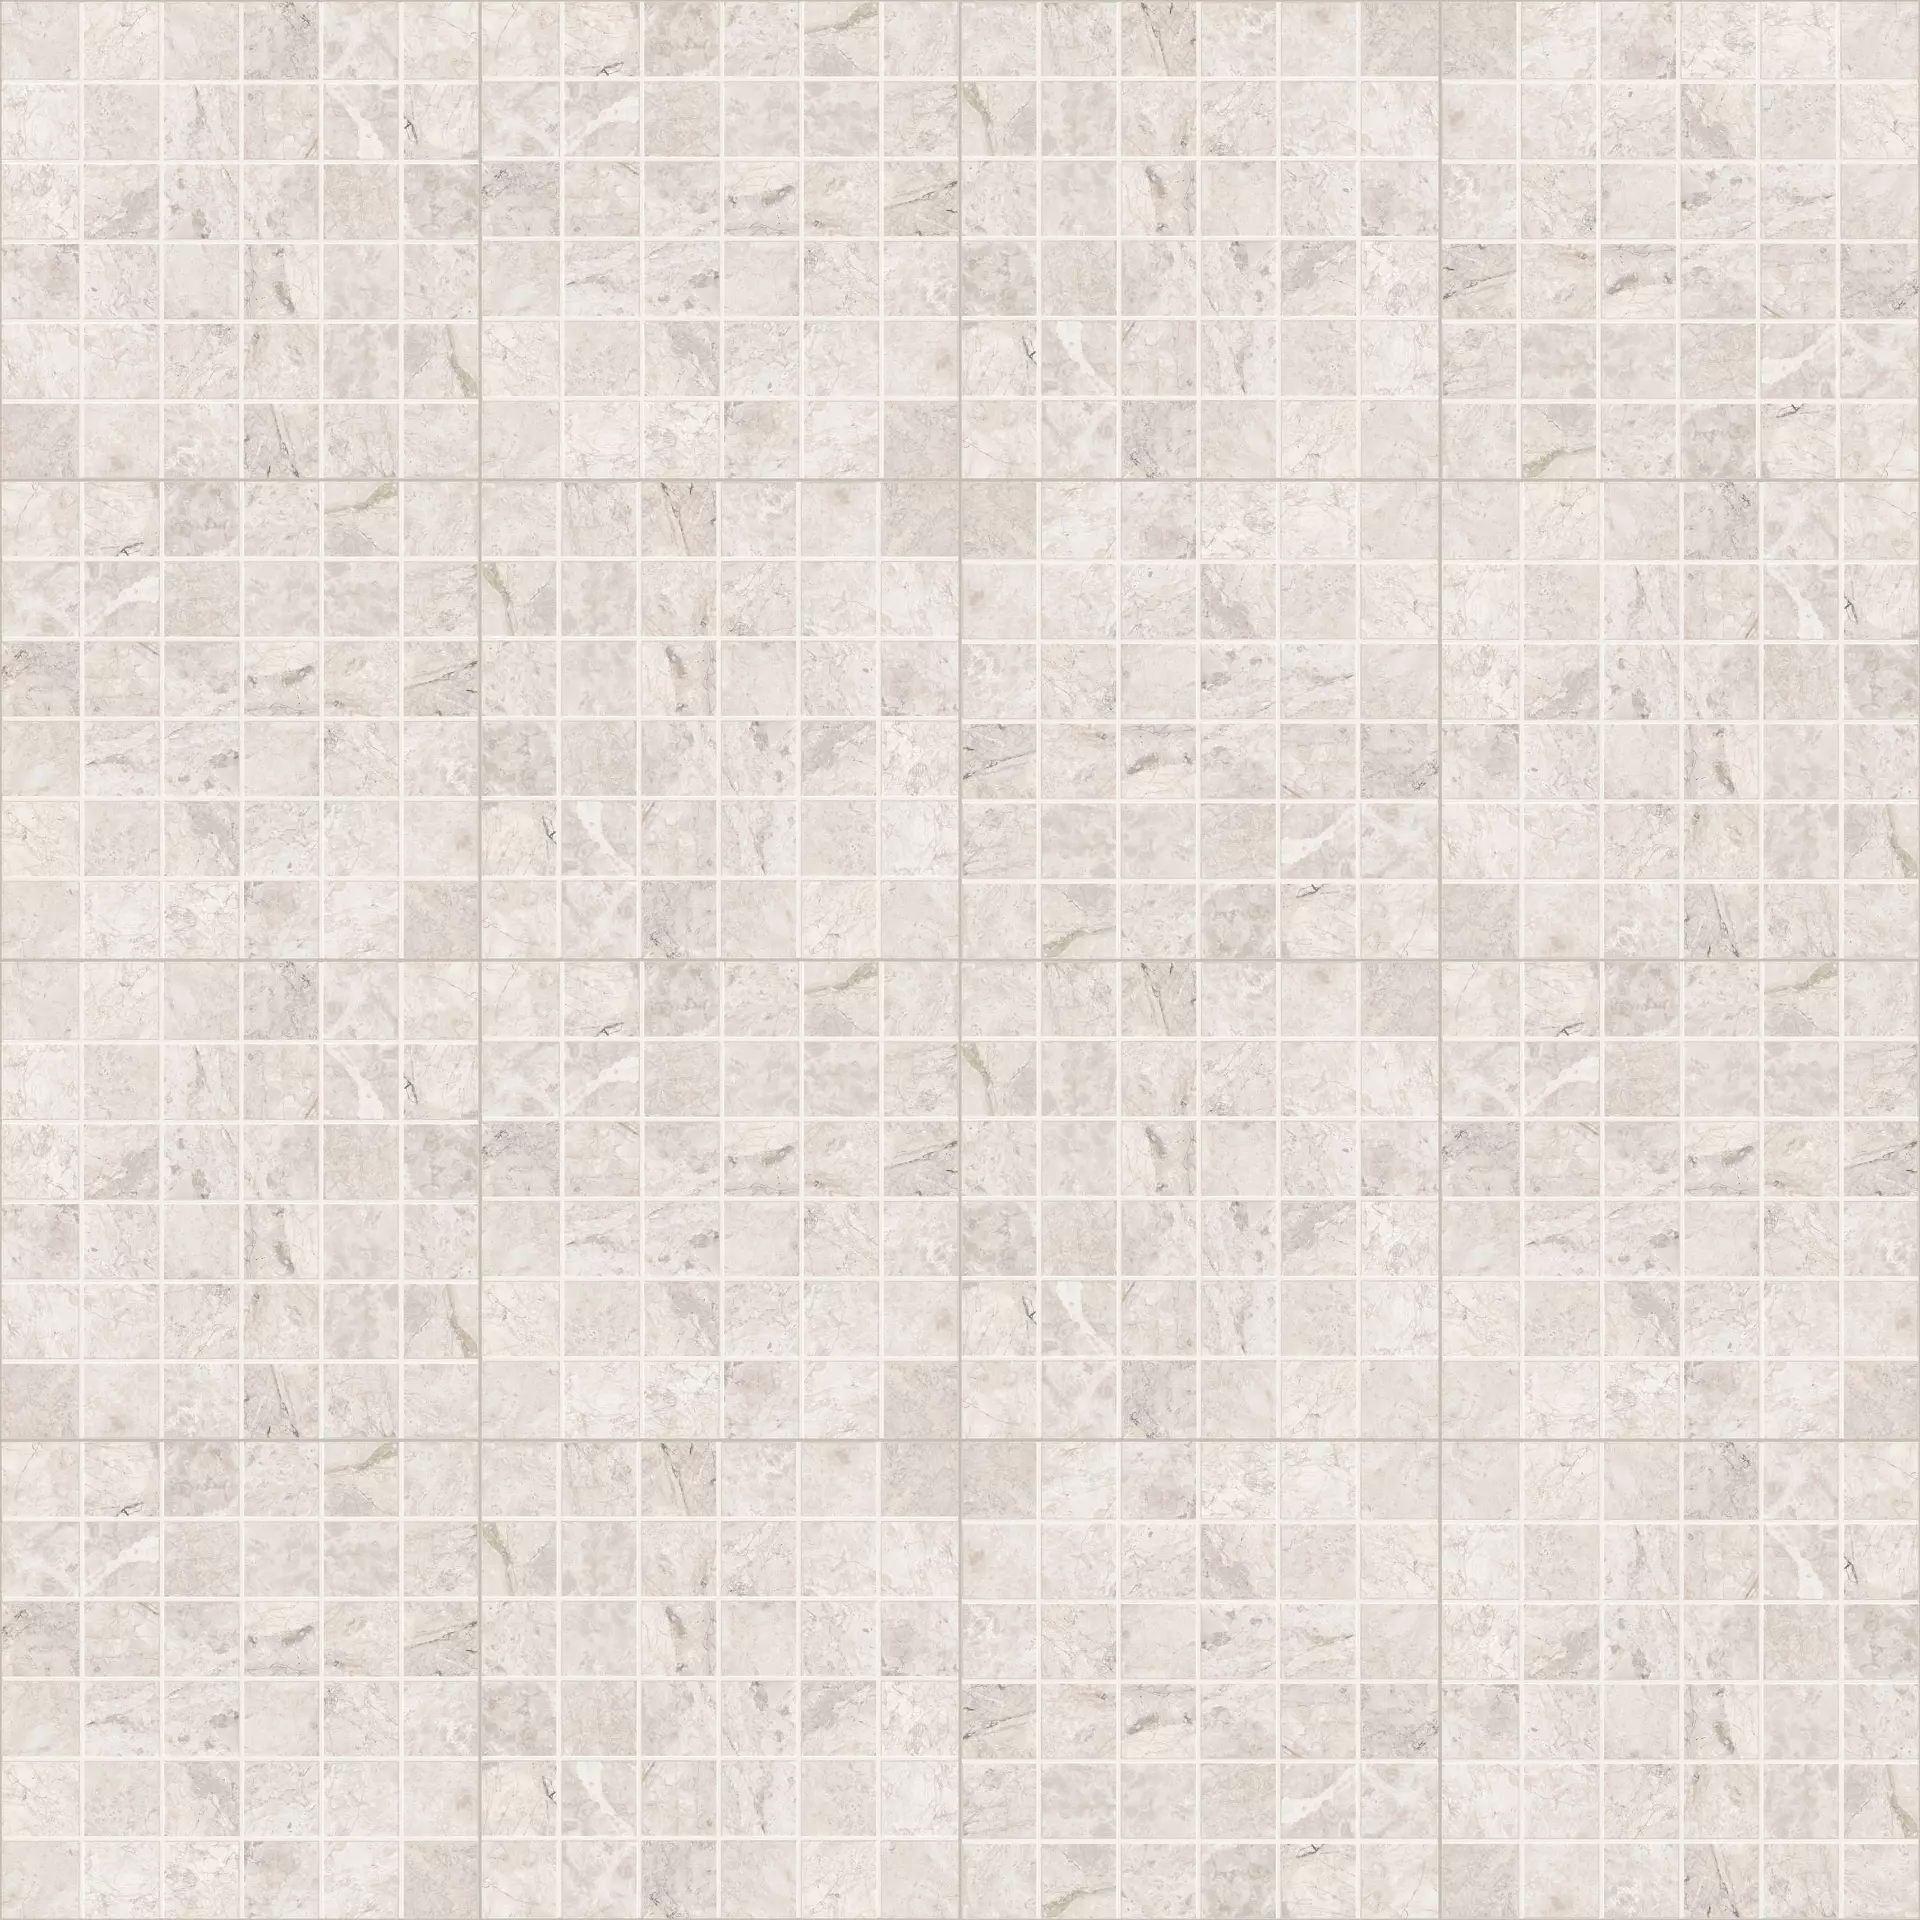 Keope Omnia Emperador White Spazzolato Mosaic T5 474B4D31 30x30cm rectified 9mm